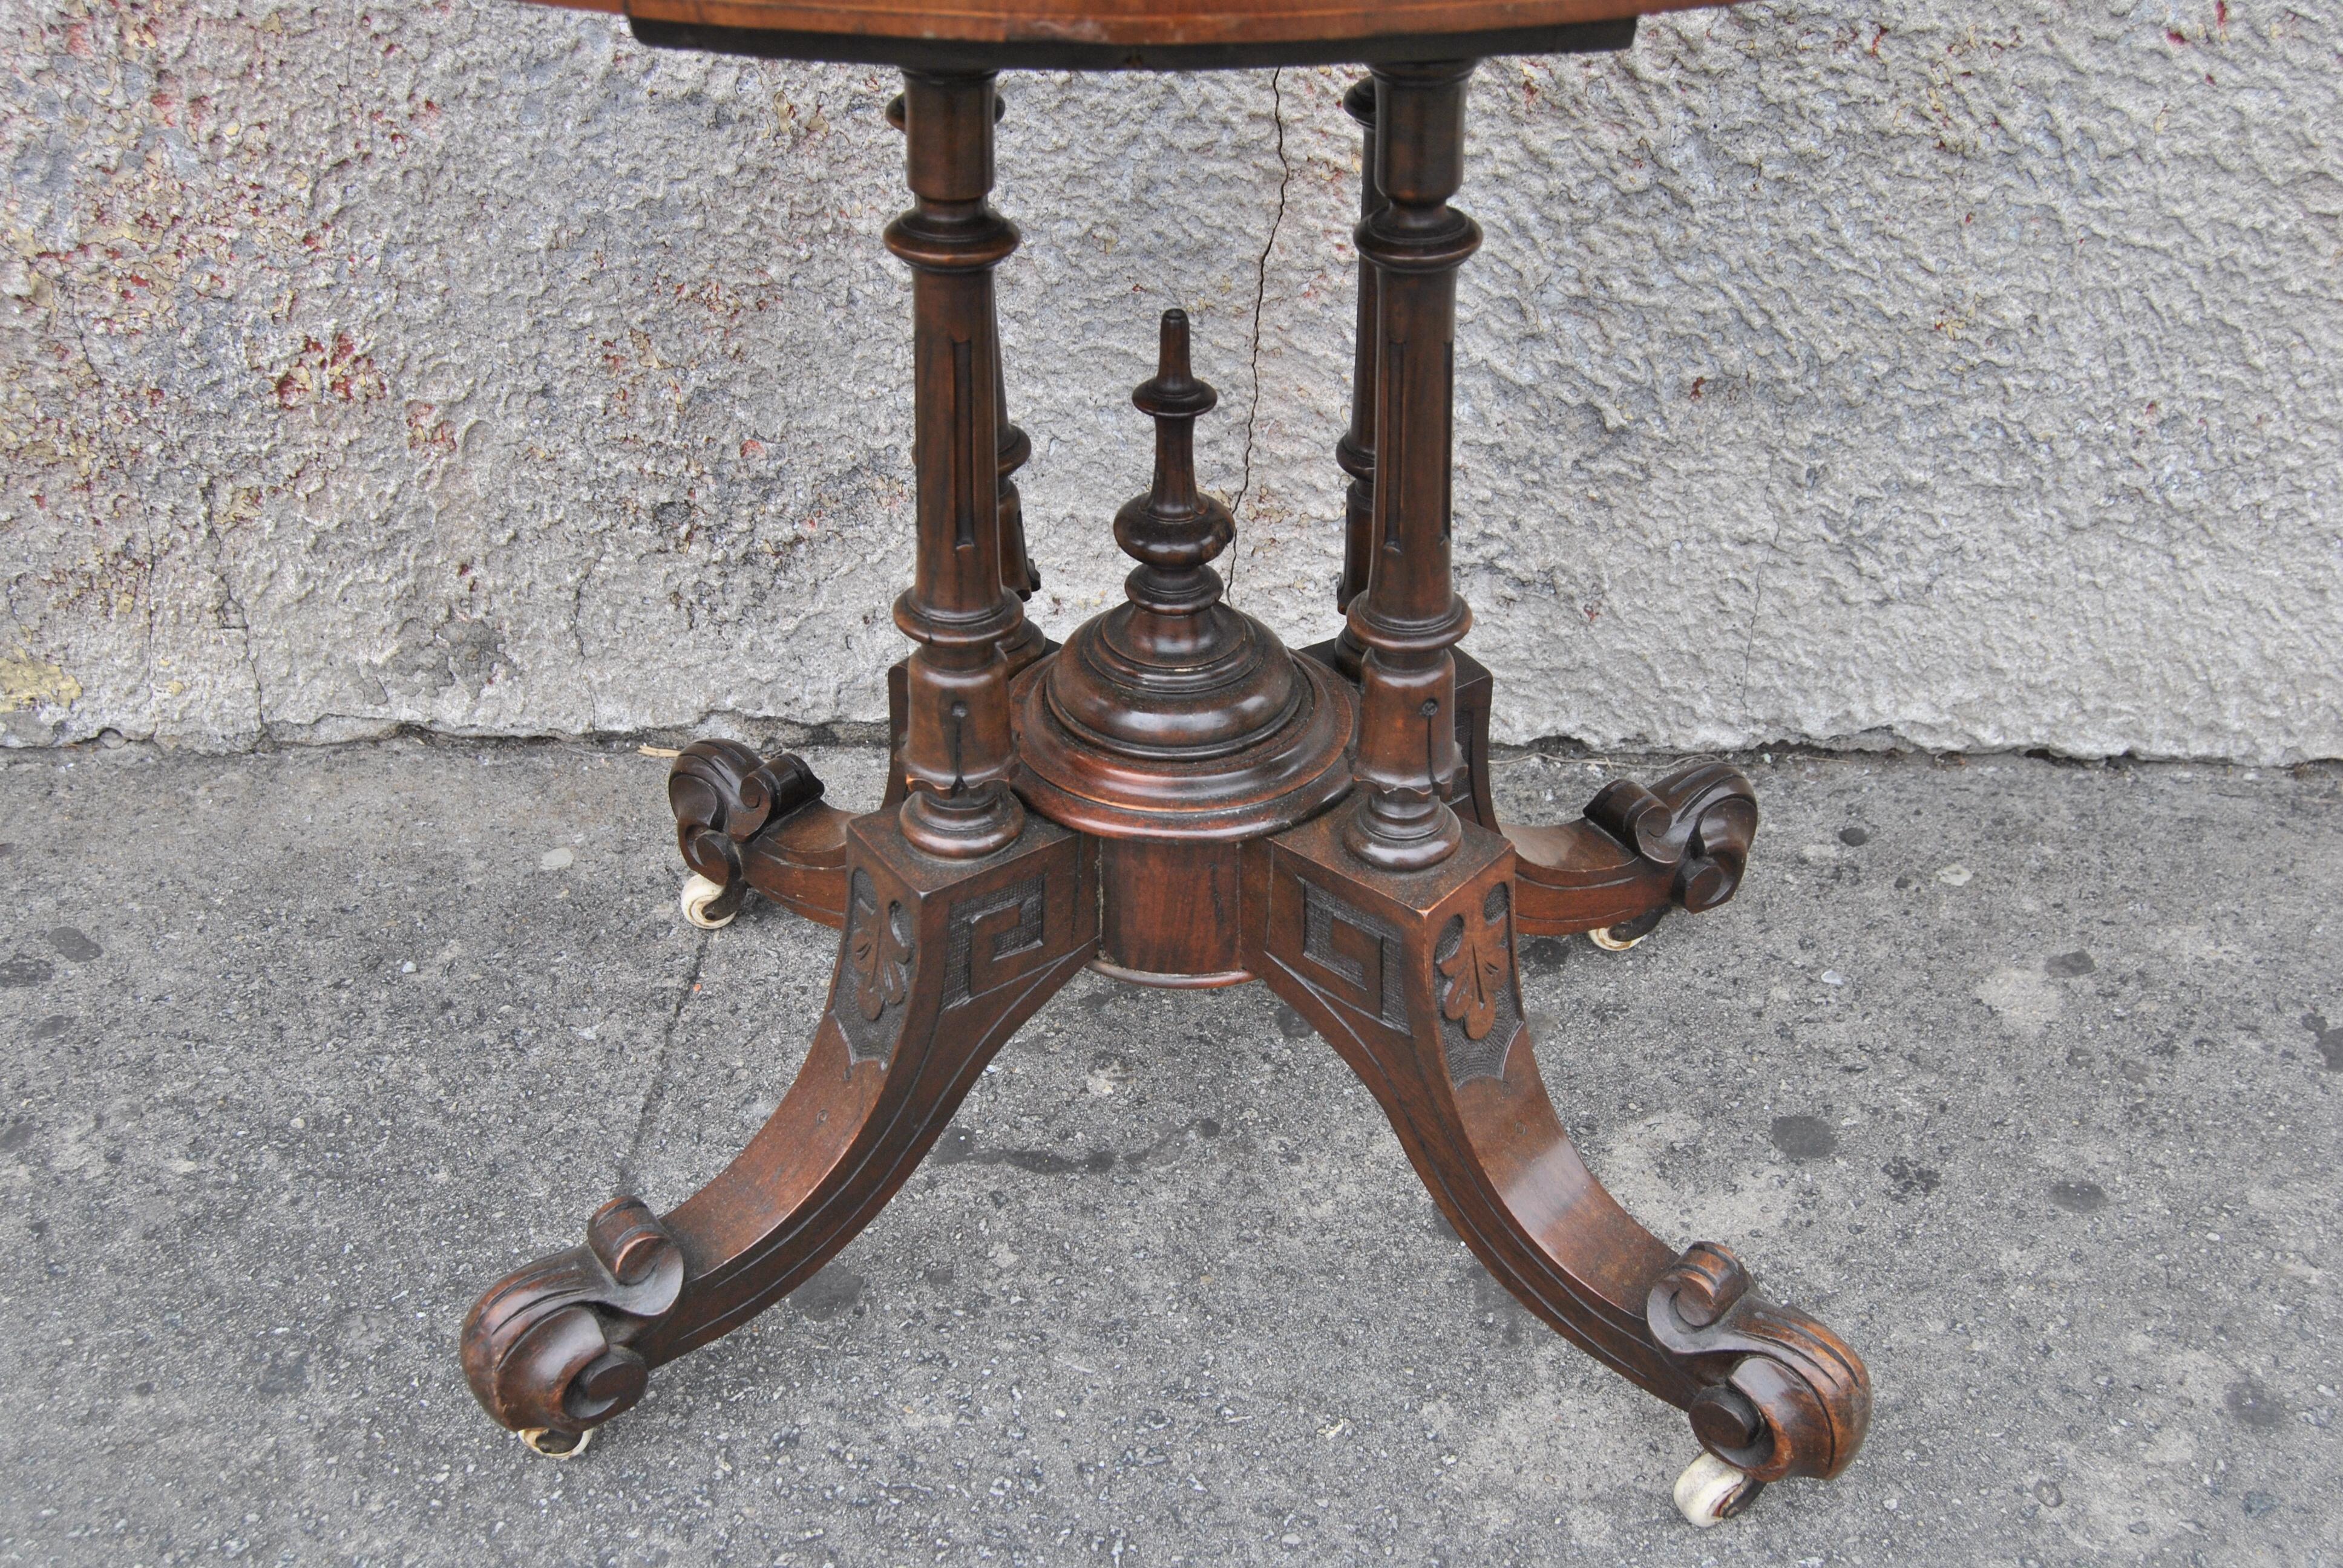 This is a game / card table made in England, circa 1870. The demi-loon top (half circle) top has a nicely molded edge with a beautiful, highly figured cut of Burr Walnut that has a wonderful decorative satinwood Inlay. The base is well turned and